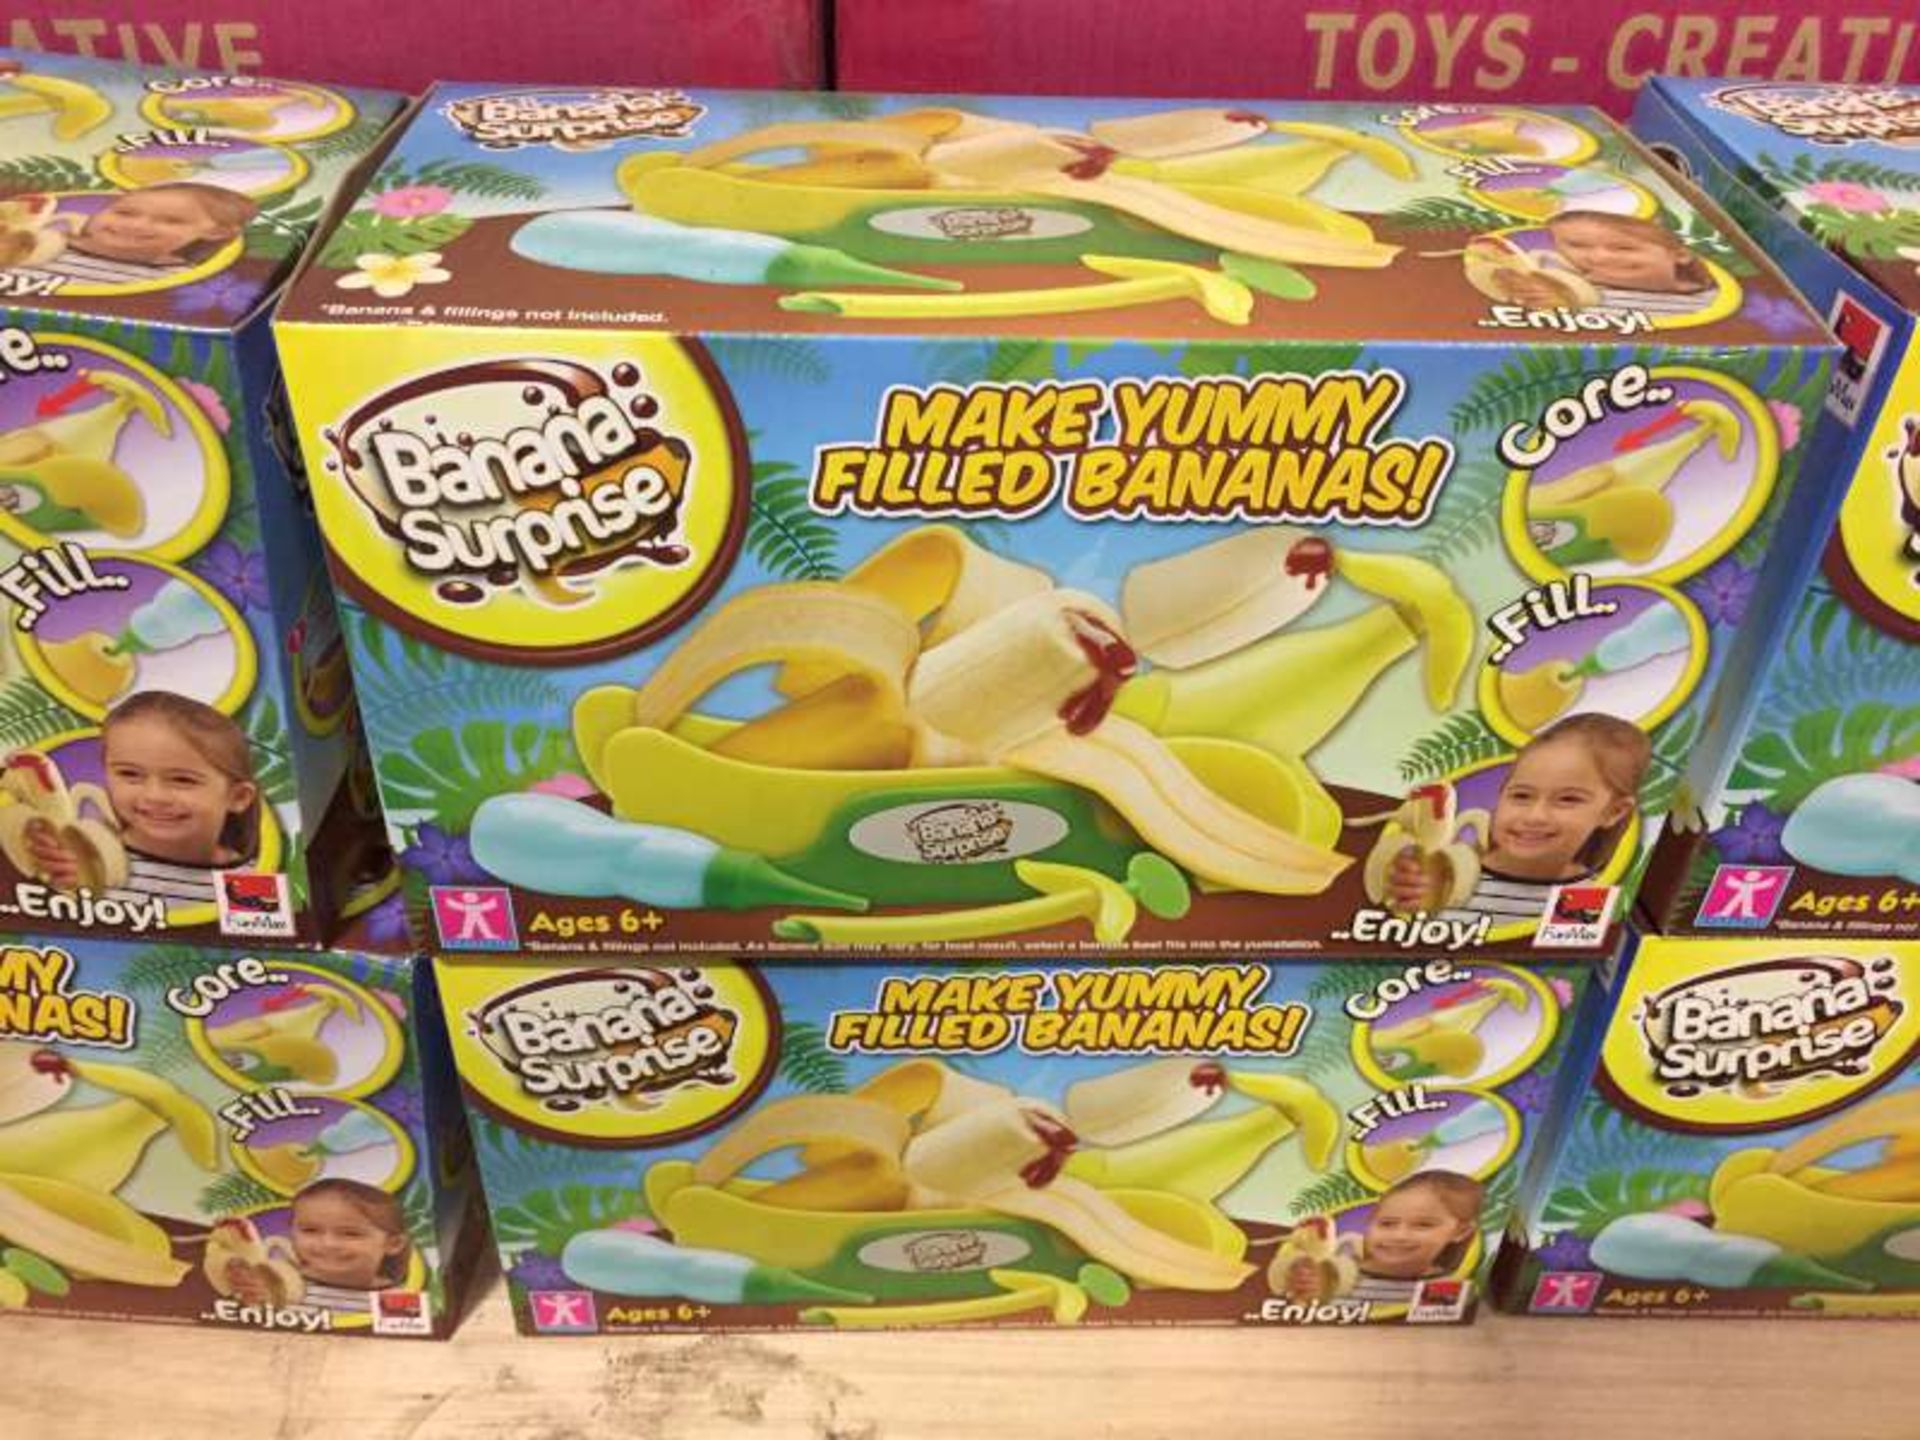 24 X BRAND NEW BOXED BANANA SURPRISE MAKE YUMMY FILLED BANANAS IN 4 BOXES